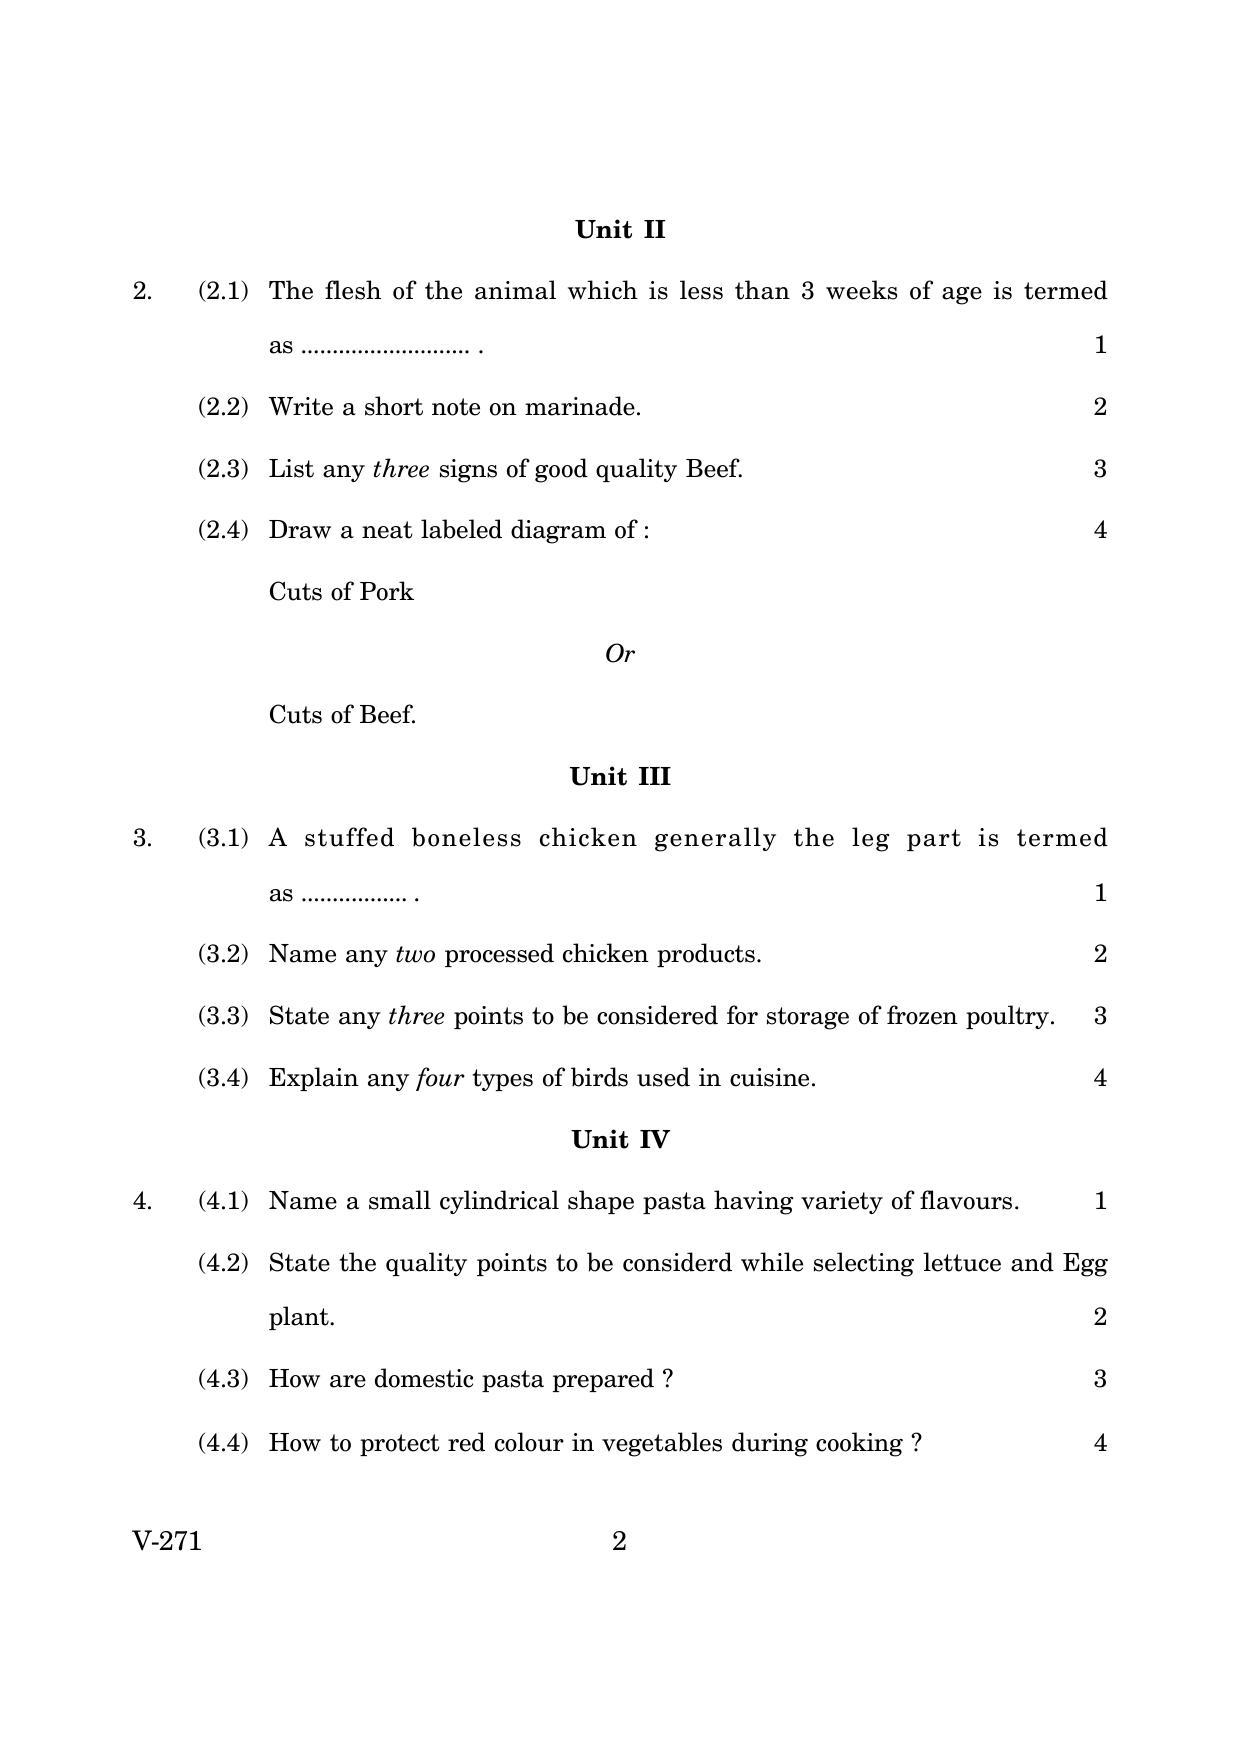 Goa Board Class 12 Food Production   (March 2019) Question Paper - Page 2